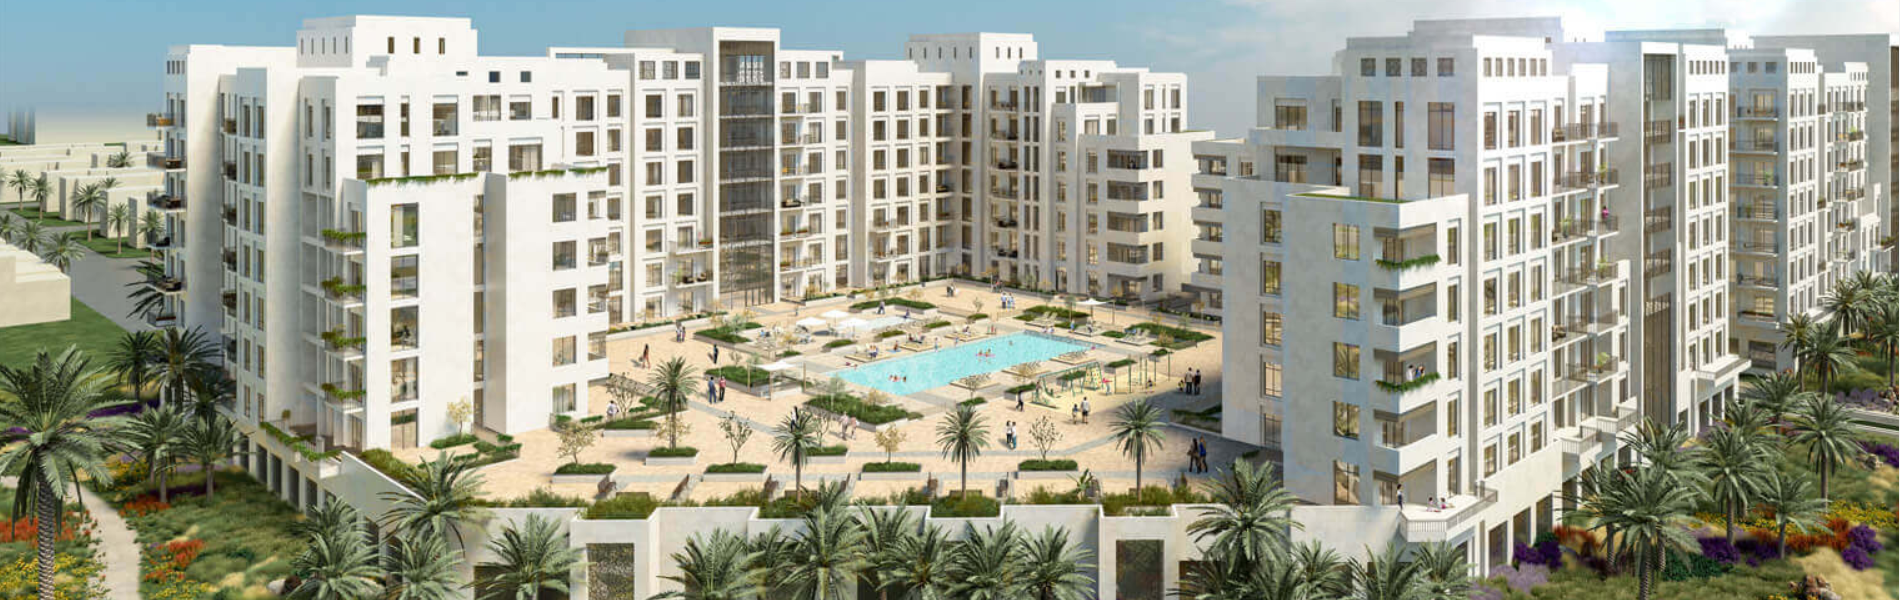 Exterior view of Zahra townhouses in Town Square Dubai